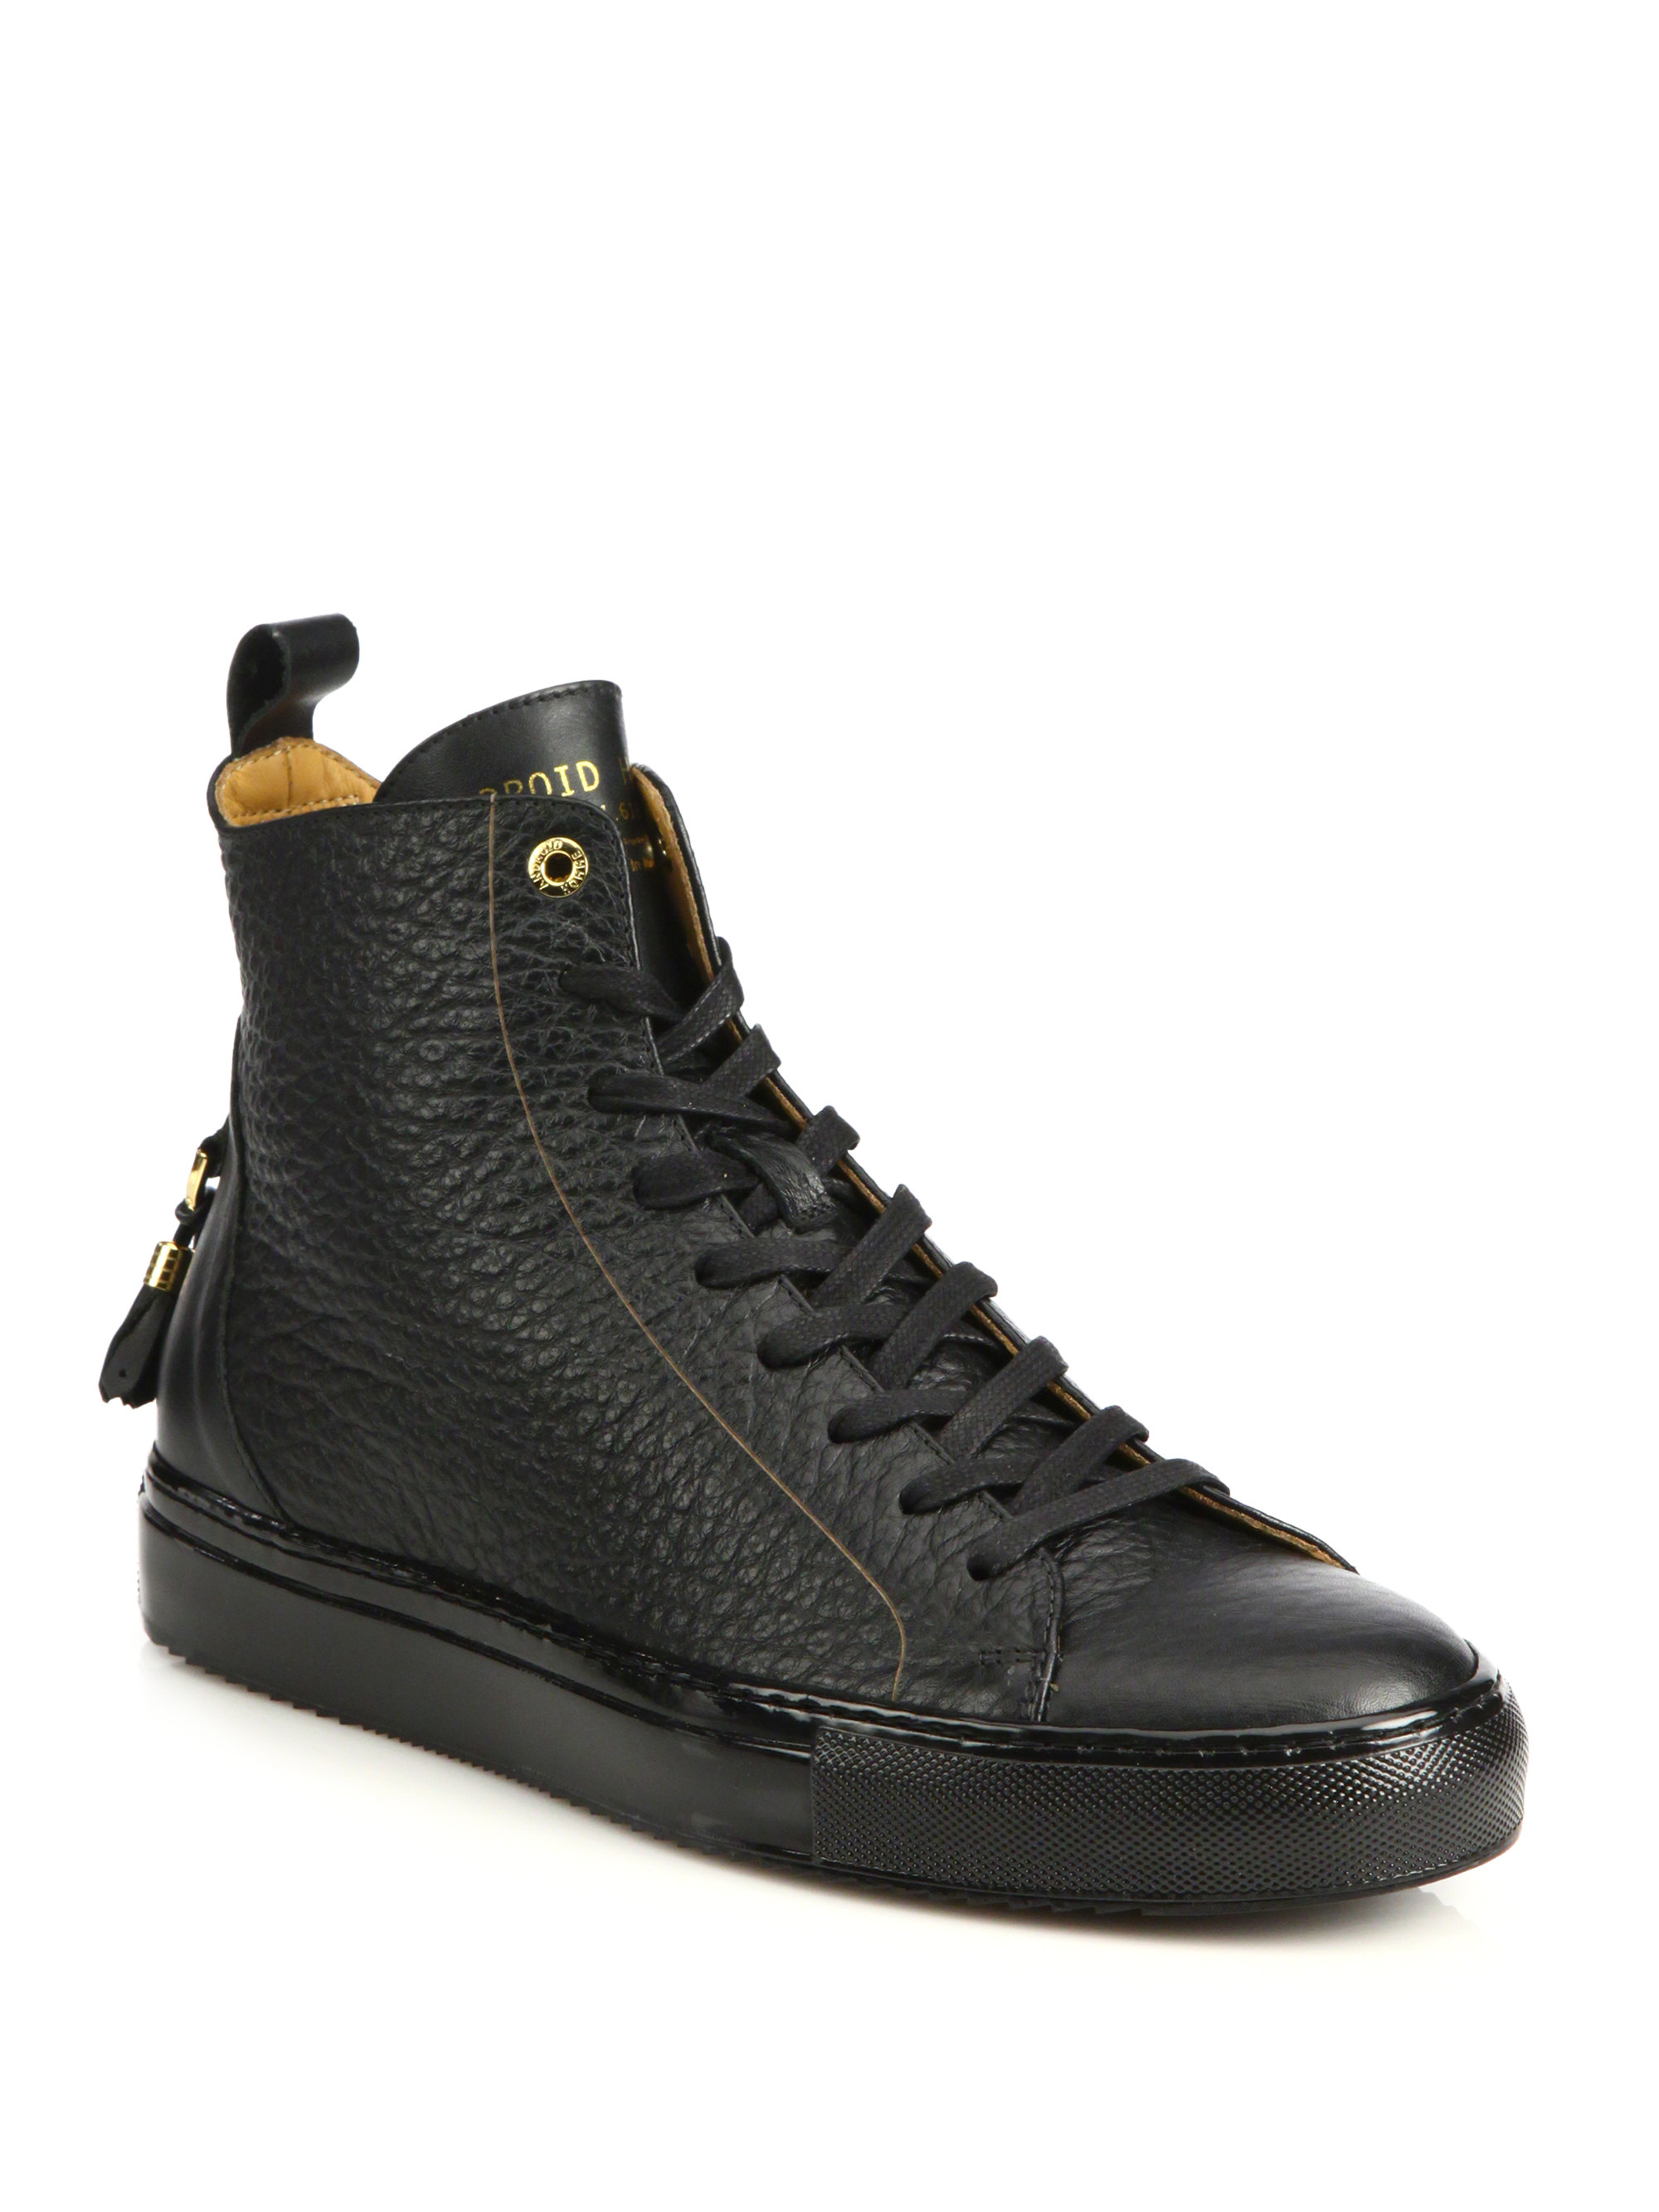 Android Homme Alfa High-top Leather Sneakers in Black for Men - Lyst